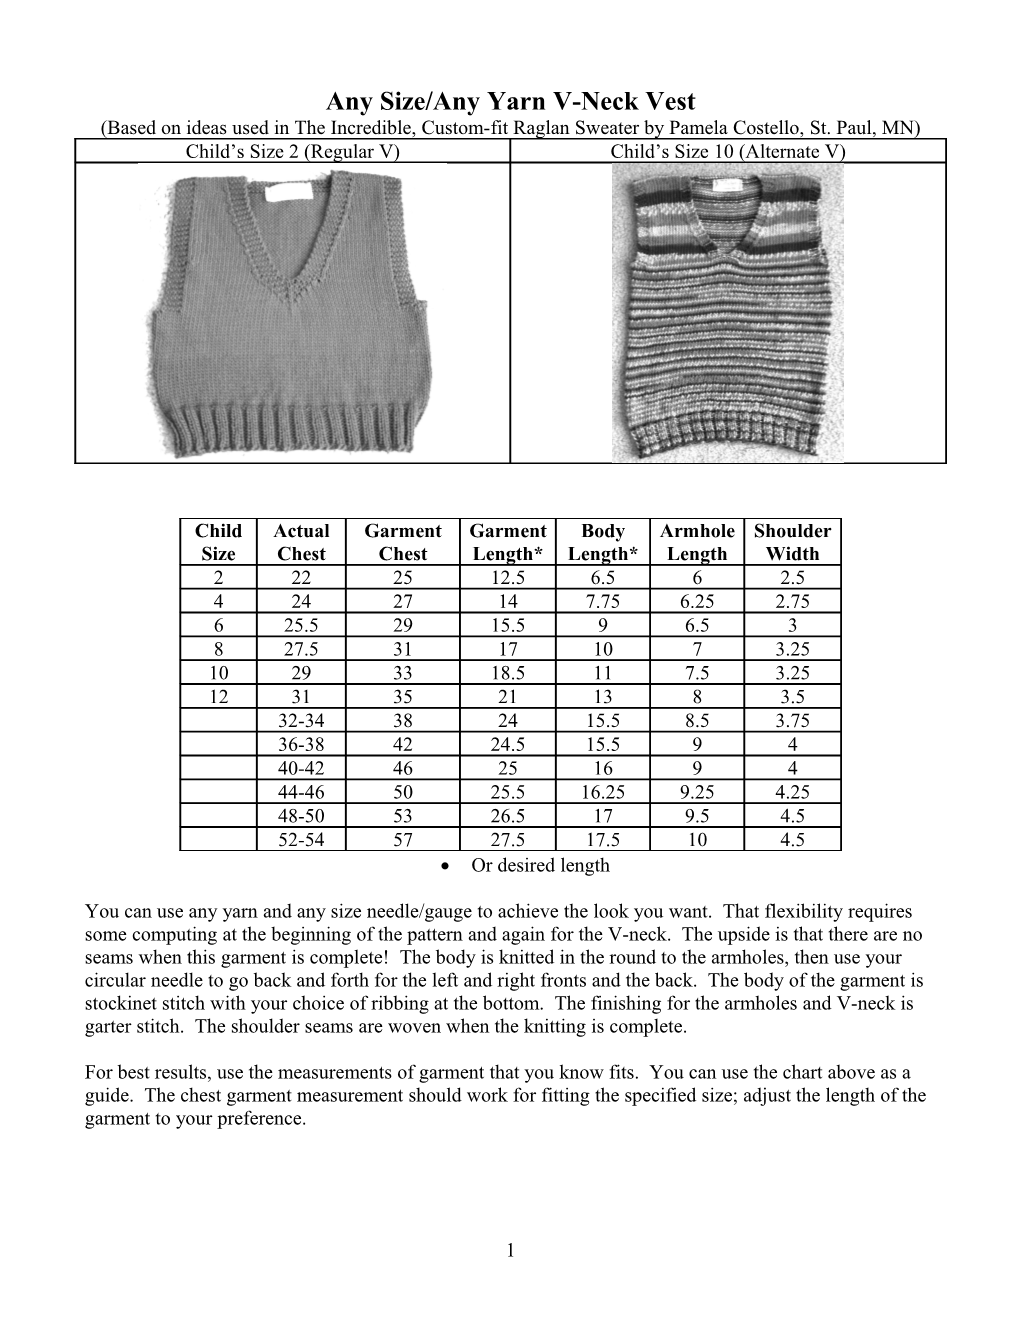 Any Size/Any Yarn Knitted Vest